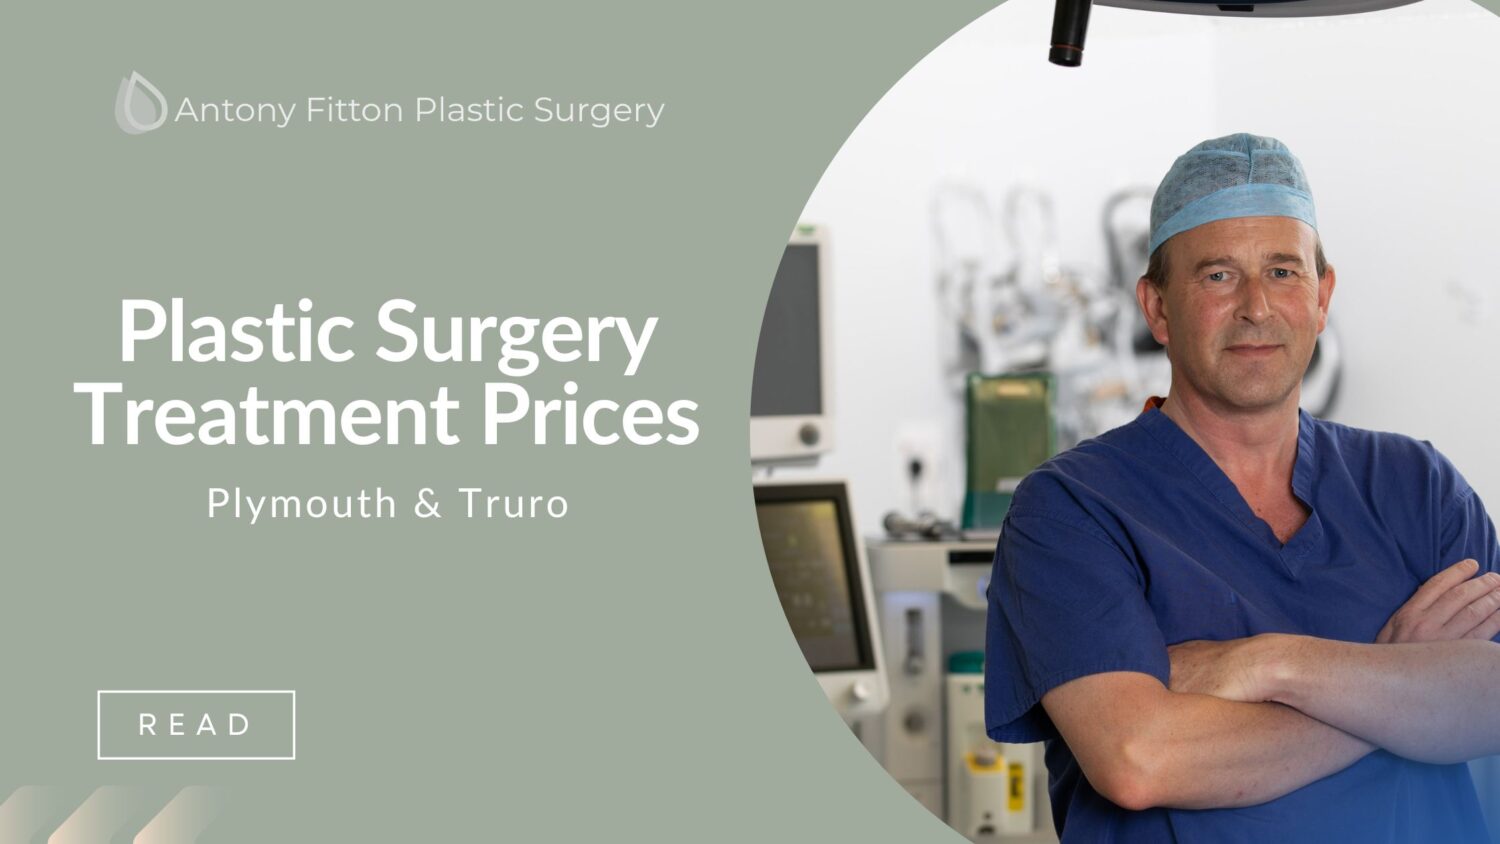 Plastic Surgery Treatment Prices - Plymouth & Truro